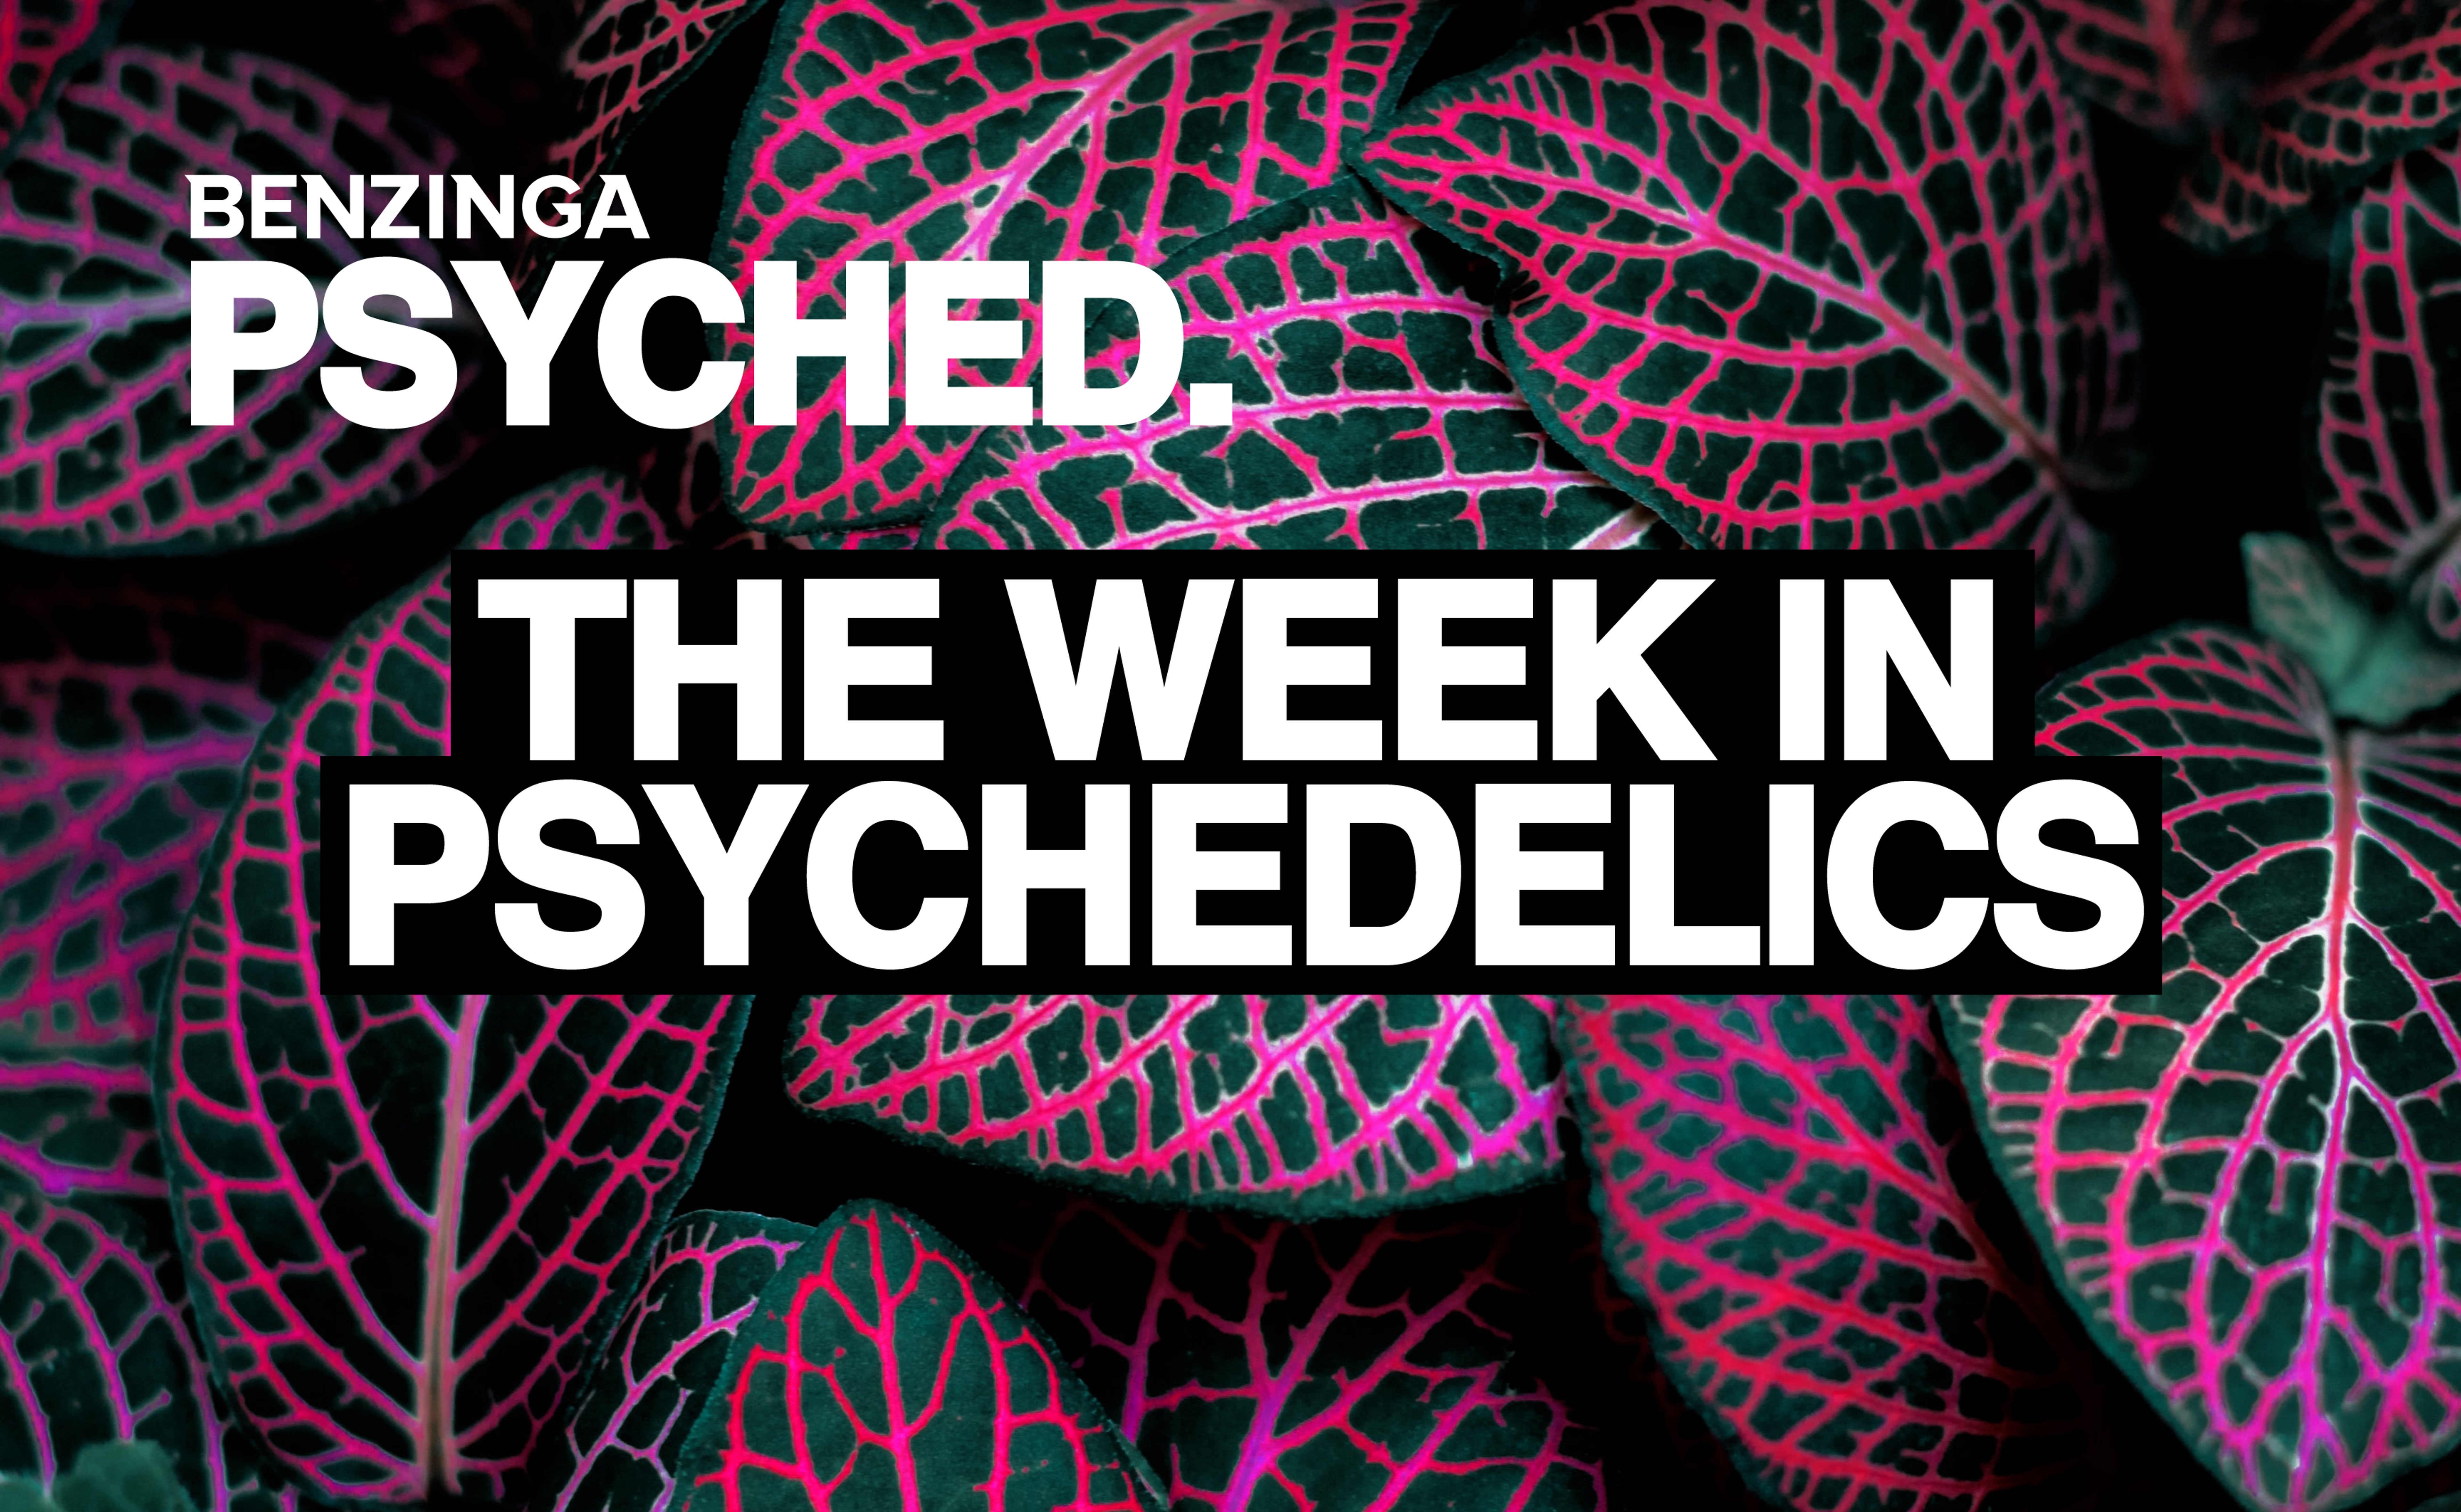 Psyched: Field Trip Gets $20 Price Target, DEA Seeks To Increase Psilocybin Production Limits, Synthesis Closes $7.25M Series A